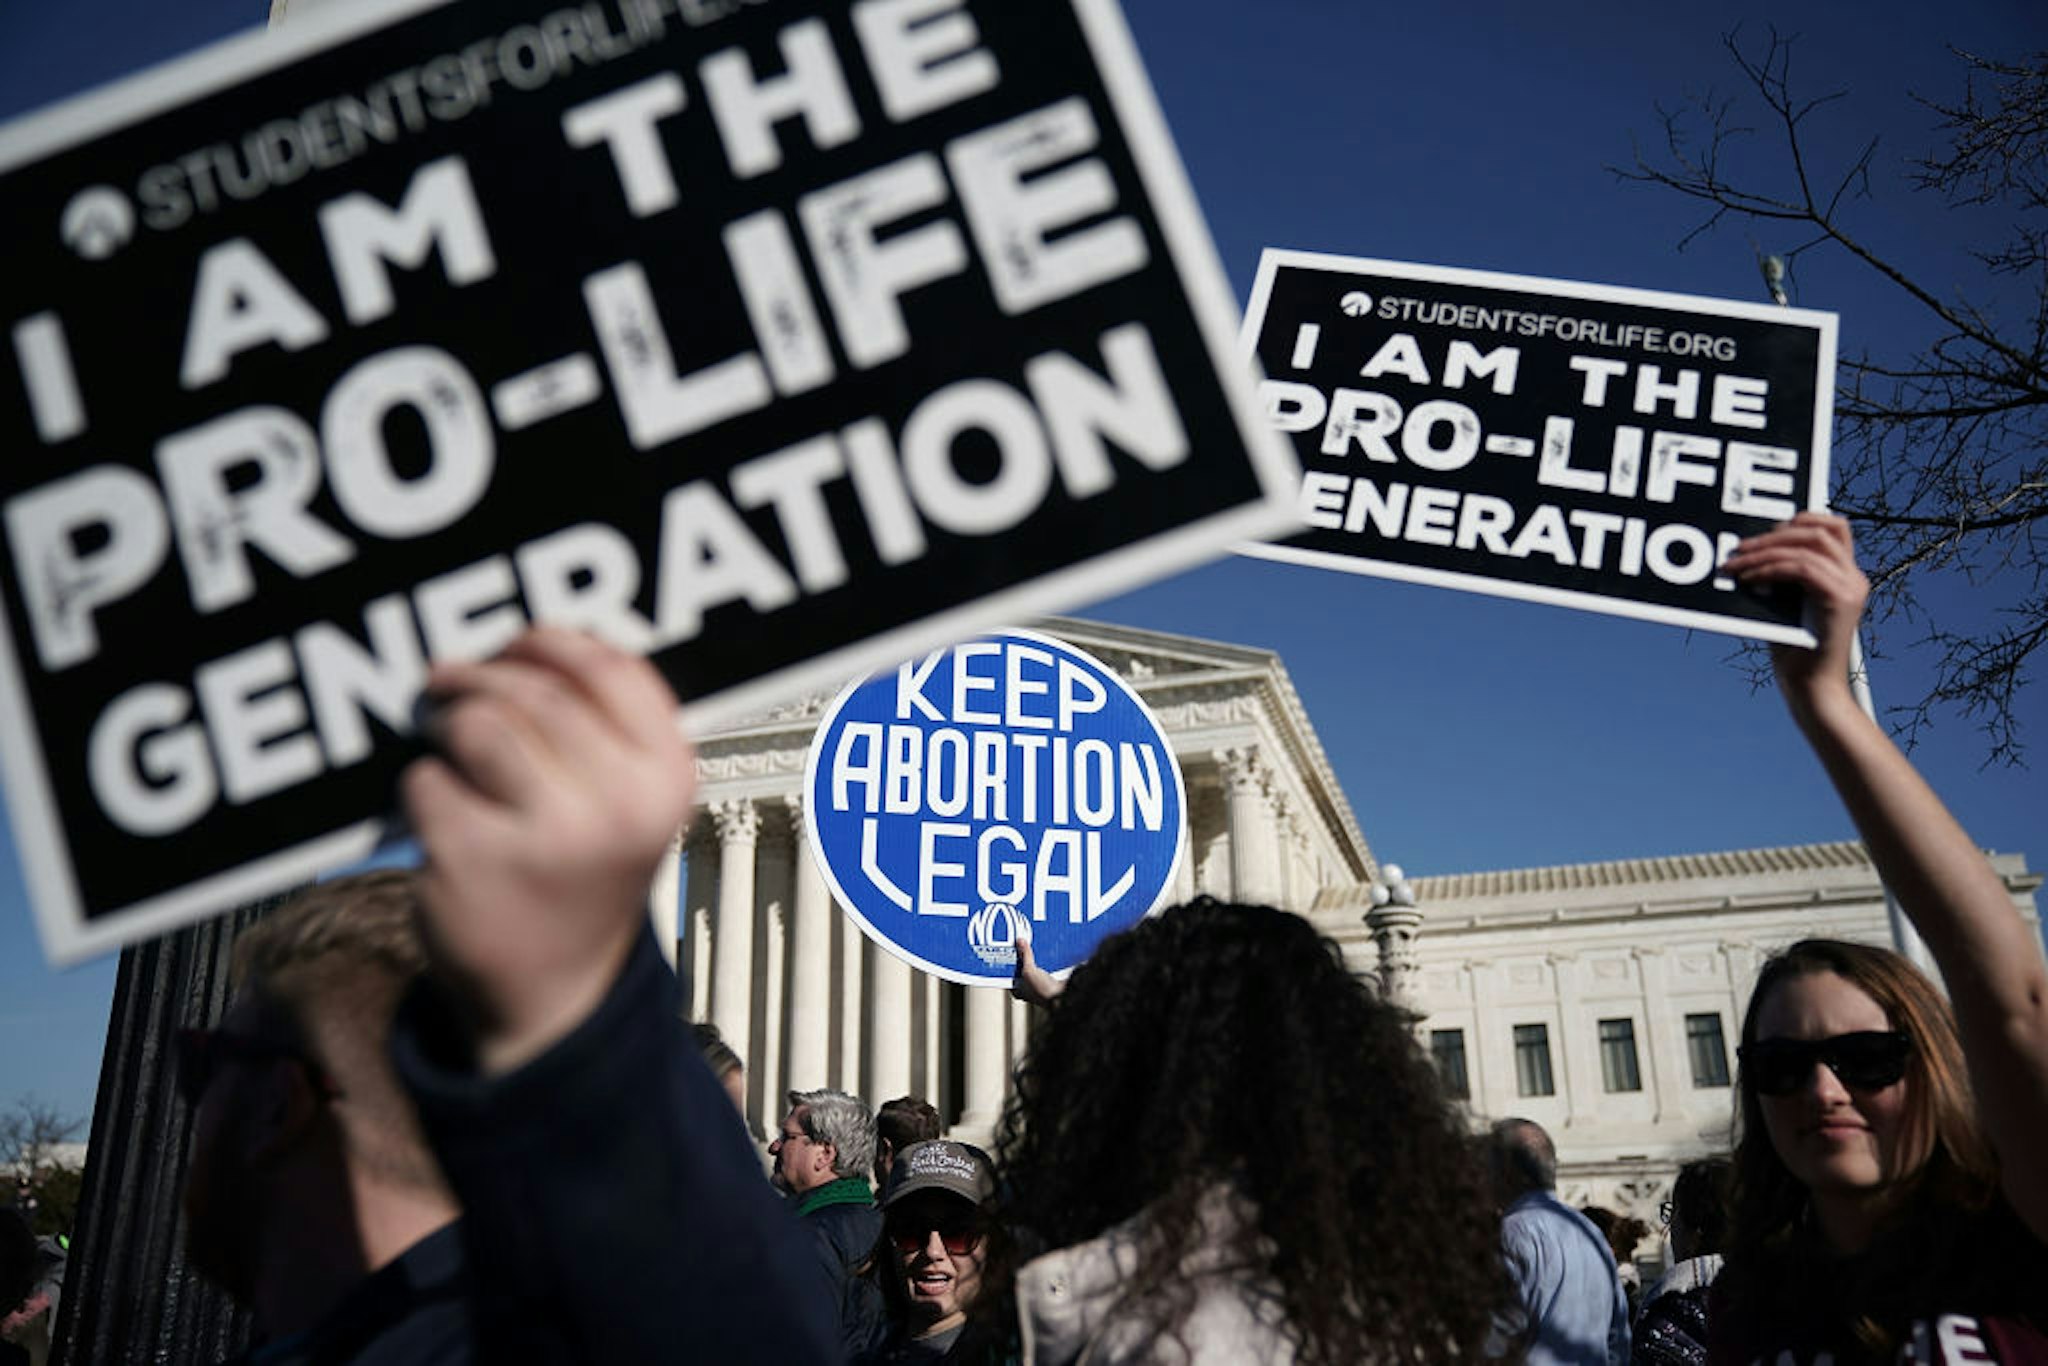 WASHINGTON, DC - JANUARY 19: Pro-life activists try to block the sign of a pro-choice activist during the 2018 March for Life January 19, 2018 in Washington, DC. Activists gathered in the nation's capital for the annual event to protest the anniversary of the Supreme Court Roe v. Wade ruling that legalized abortion in 1973.